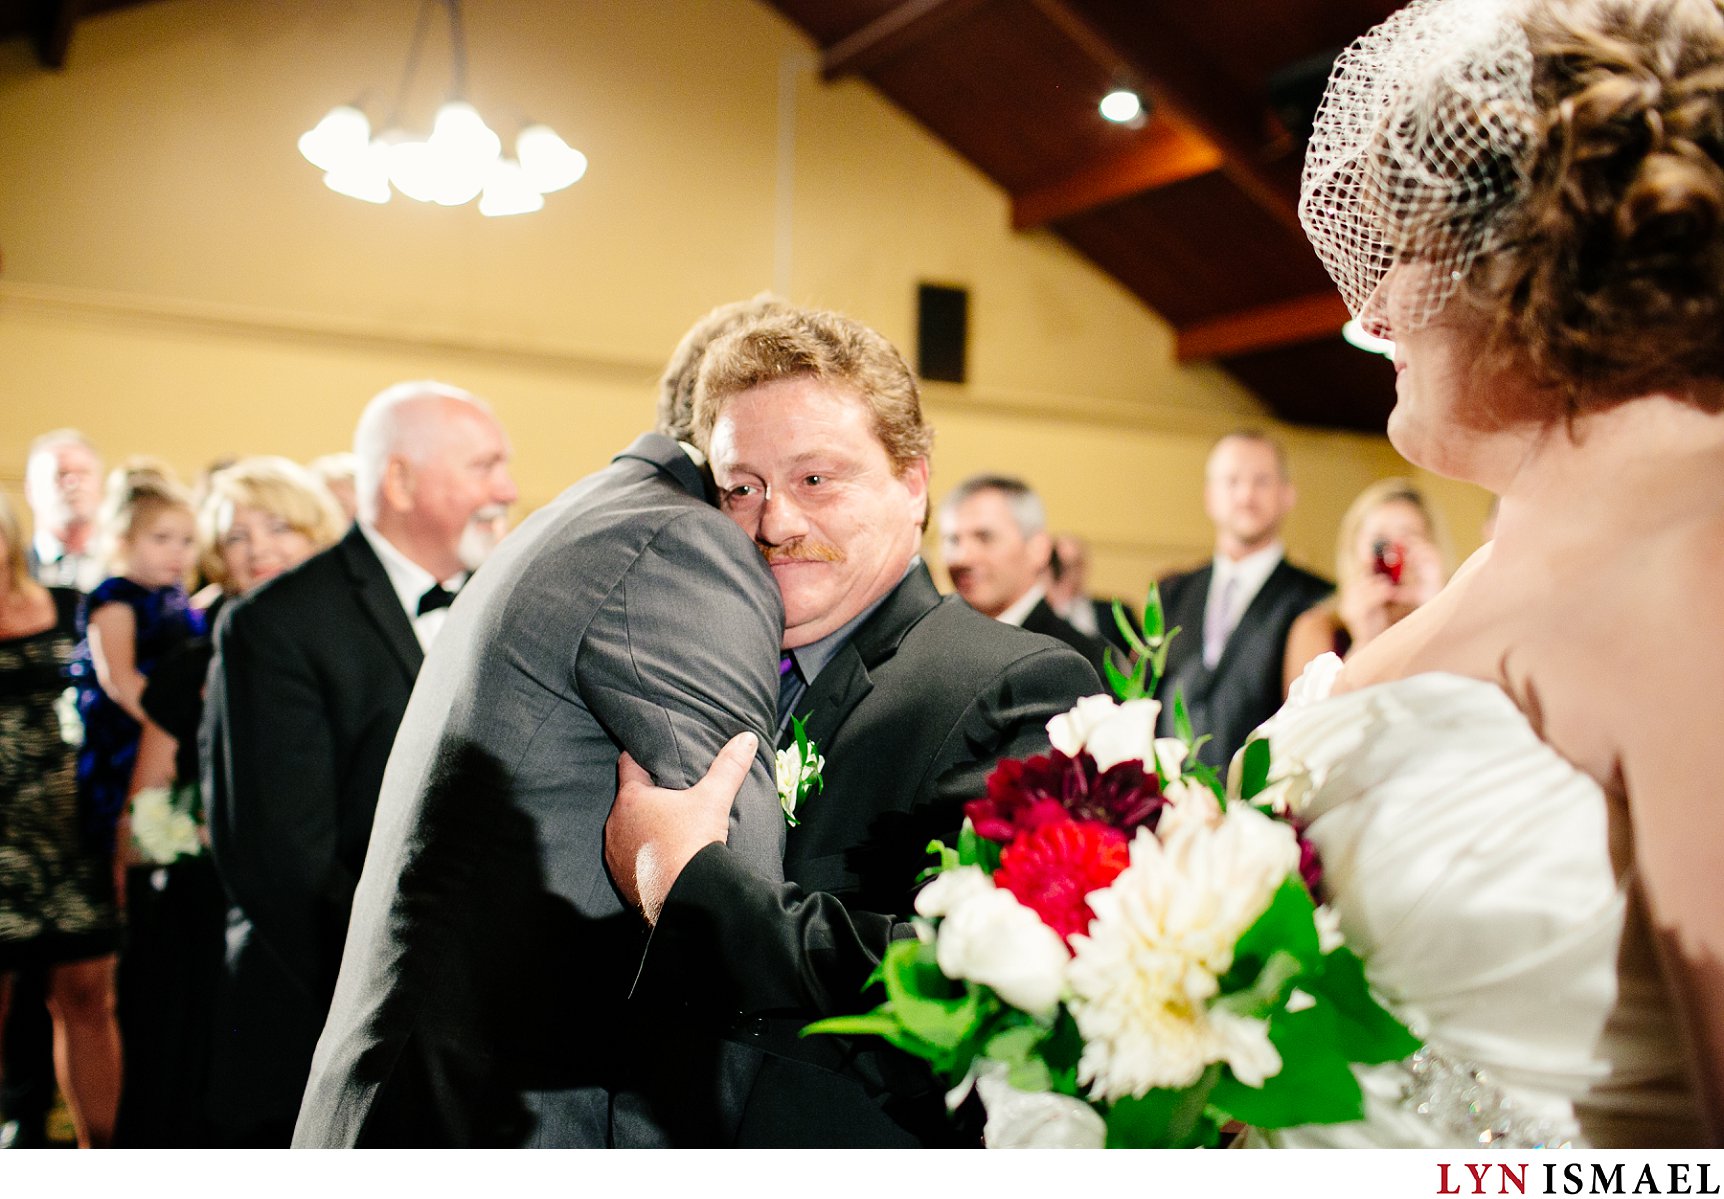 Wedding photojournalist captures the father of the bride hugging the groom as he gives his daughter's hand in marriage.